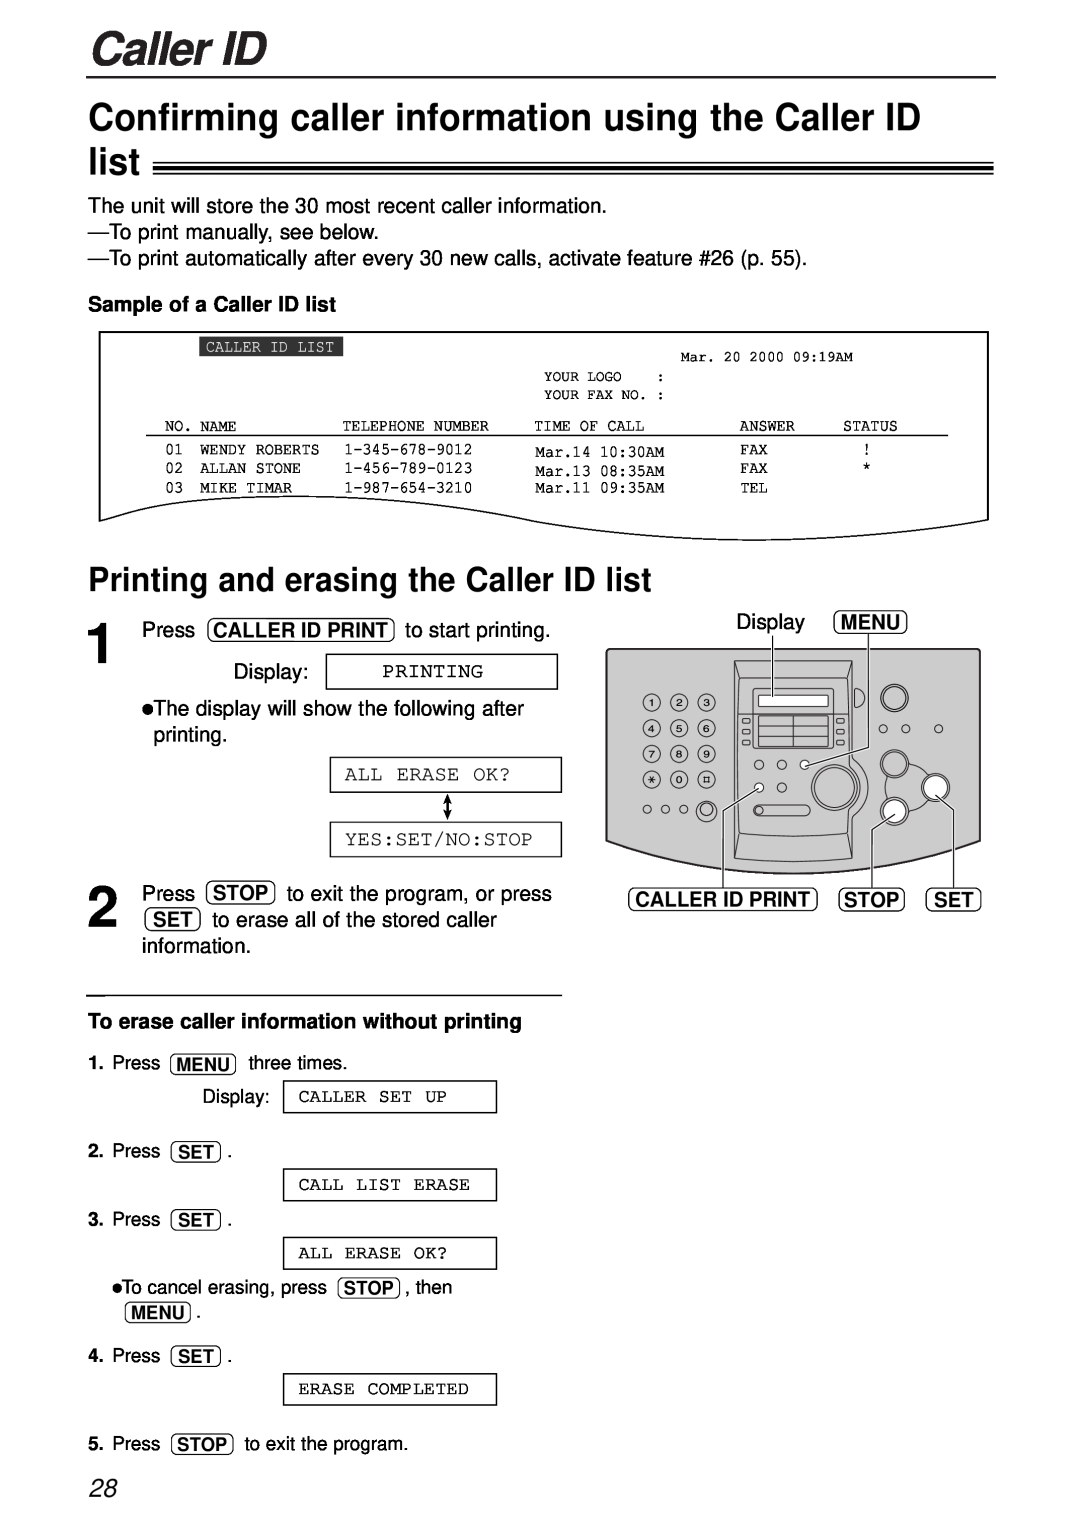 Panasonic KX-FL501 manual Confirming caller information using the Caller ID list, Printing and erasing the Caller ID list 